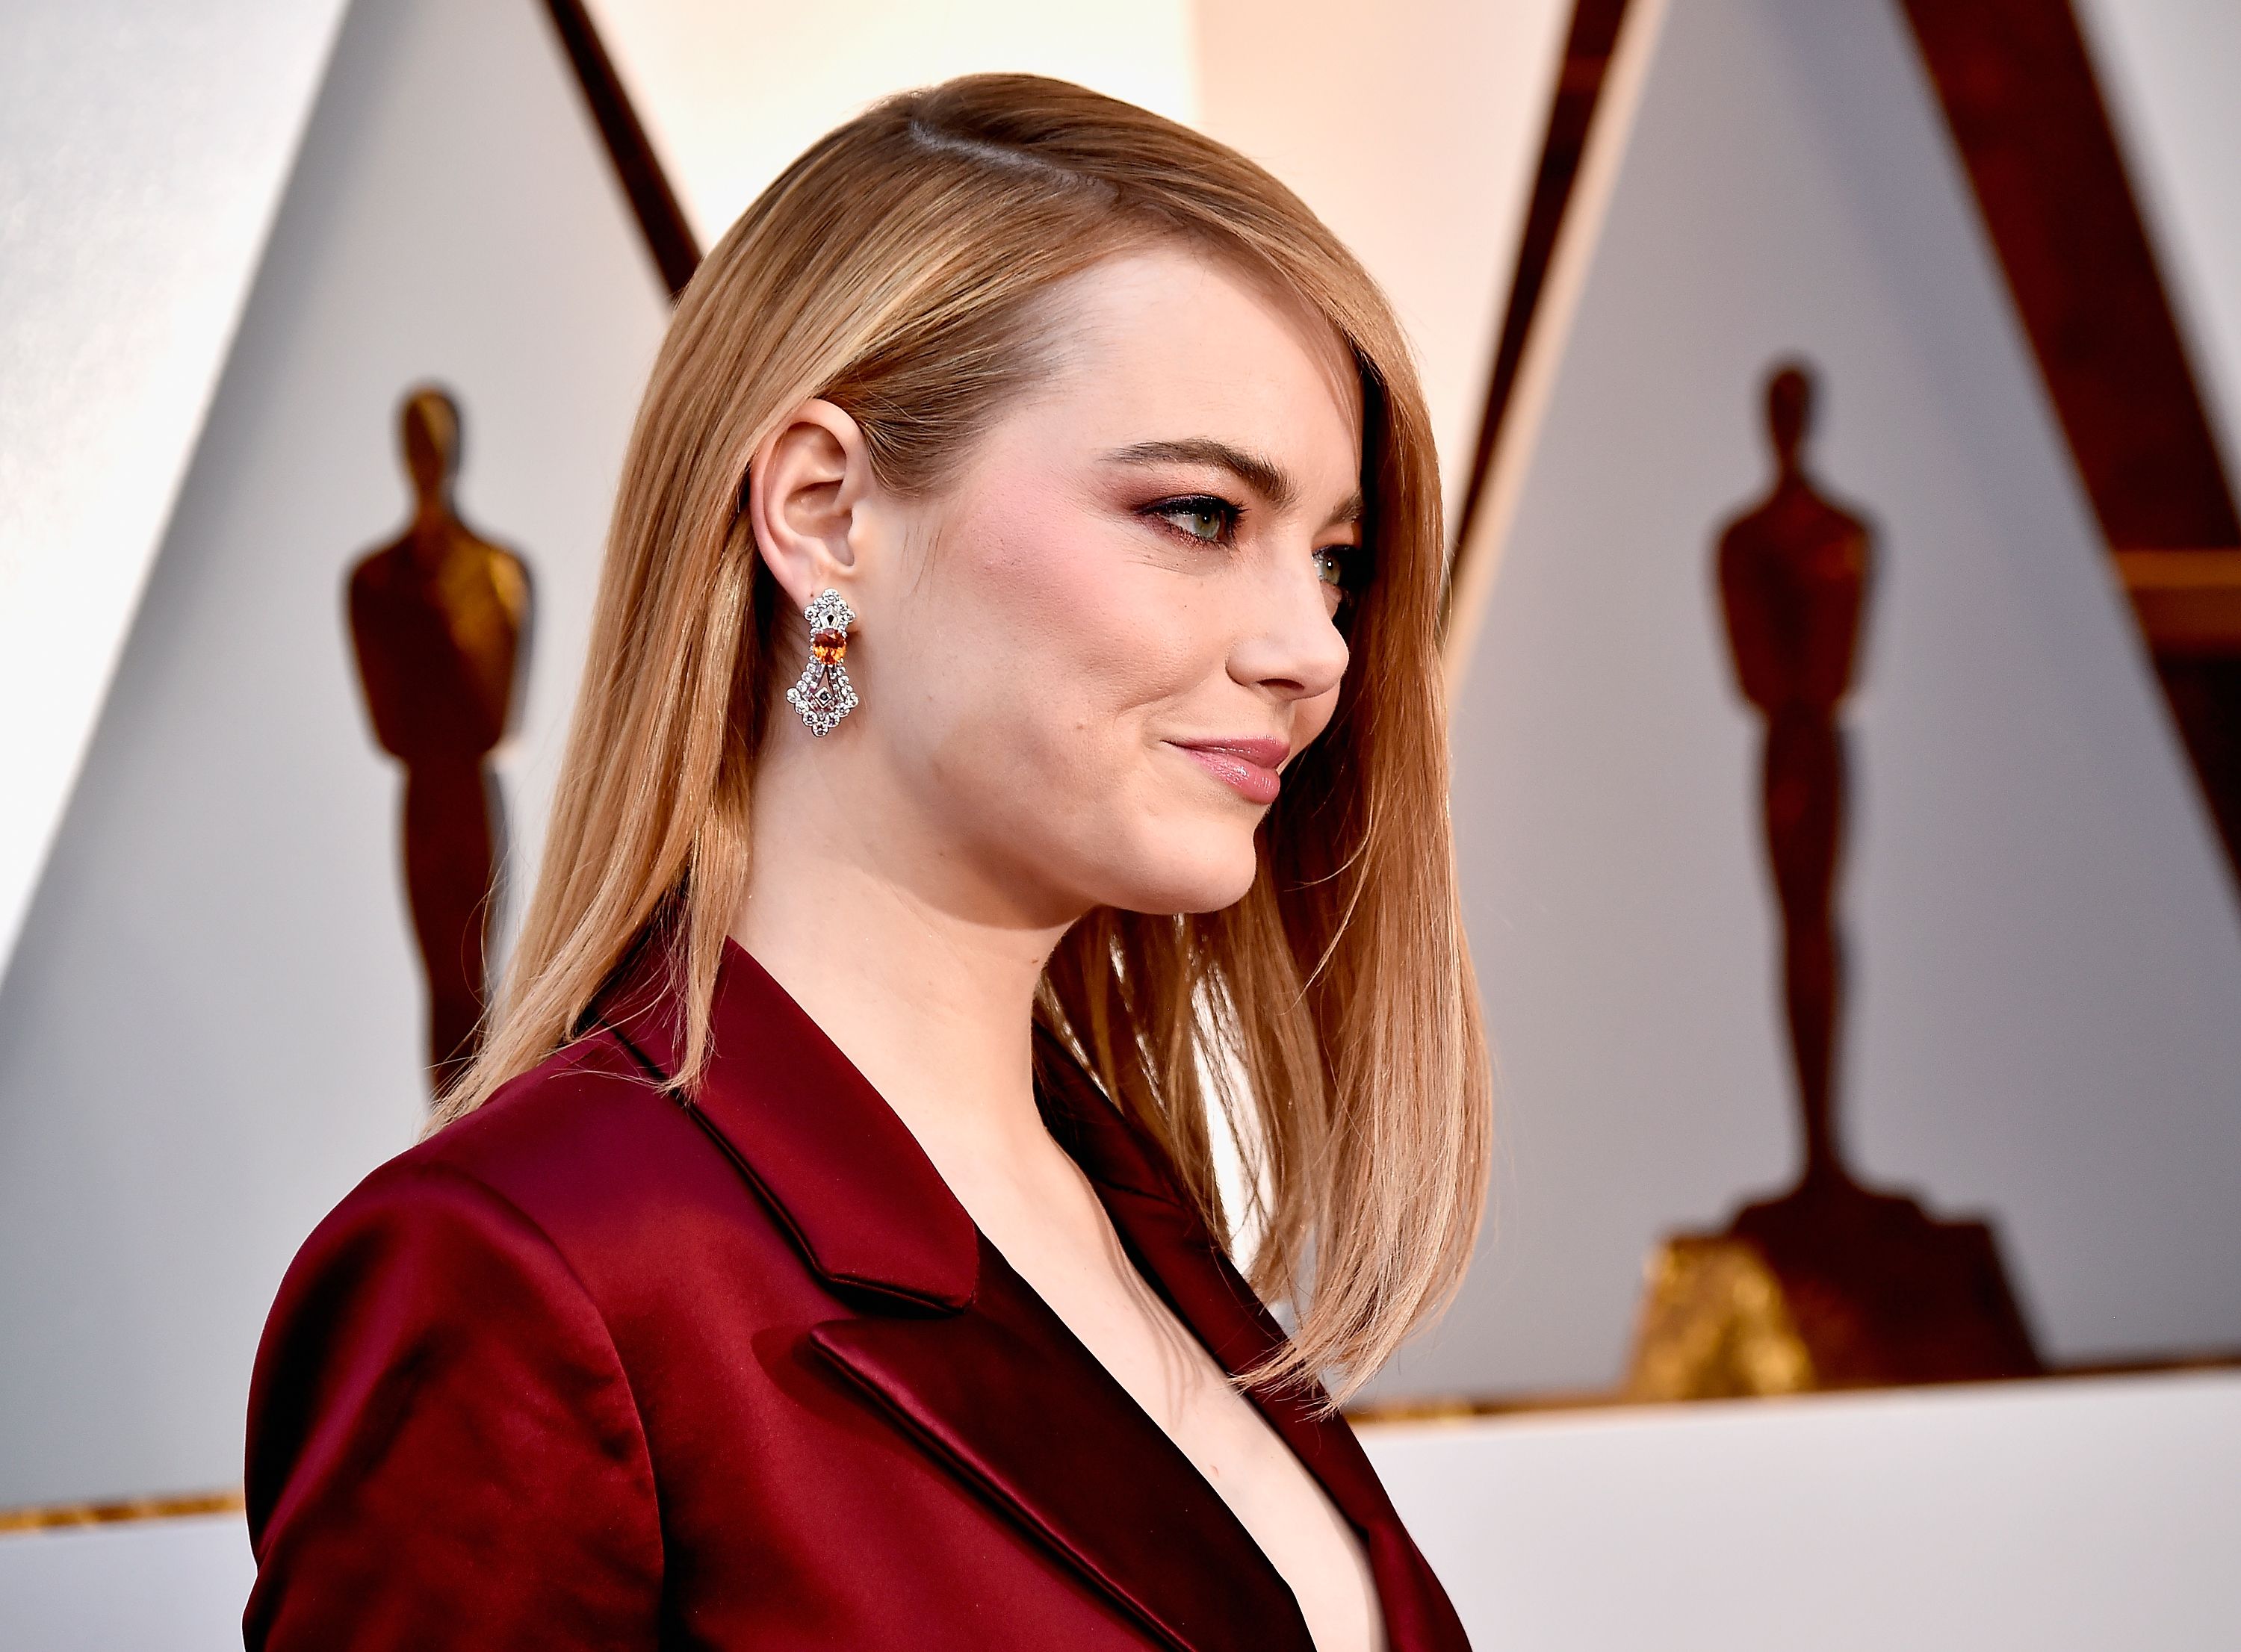 Emma Stone Wore Pants and a Blazer on the Oscars 2018 Red Carpet